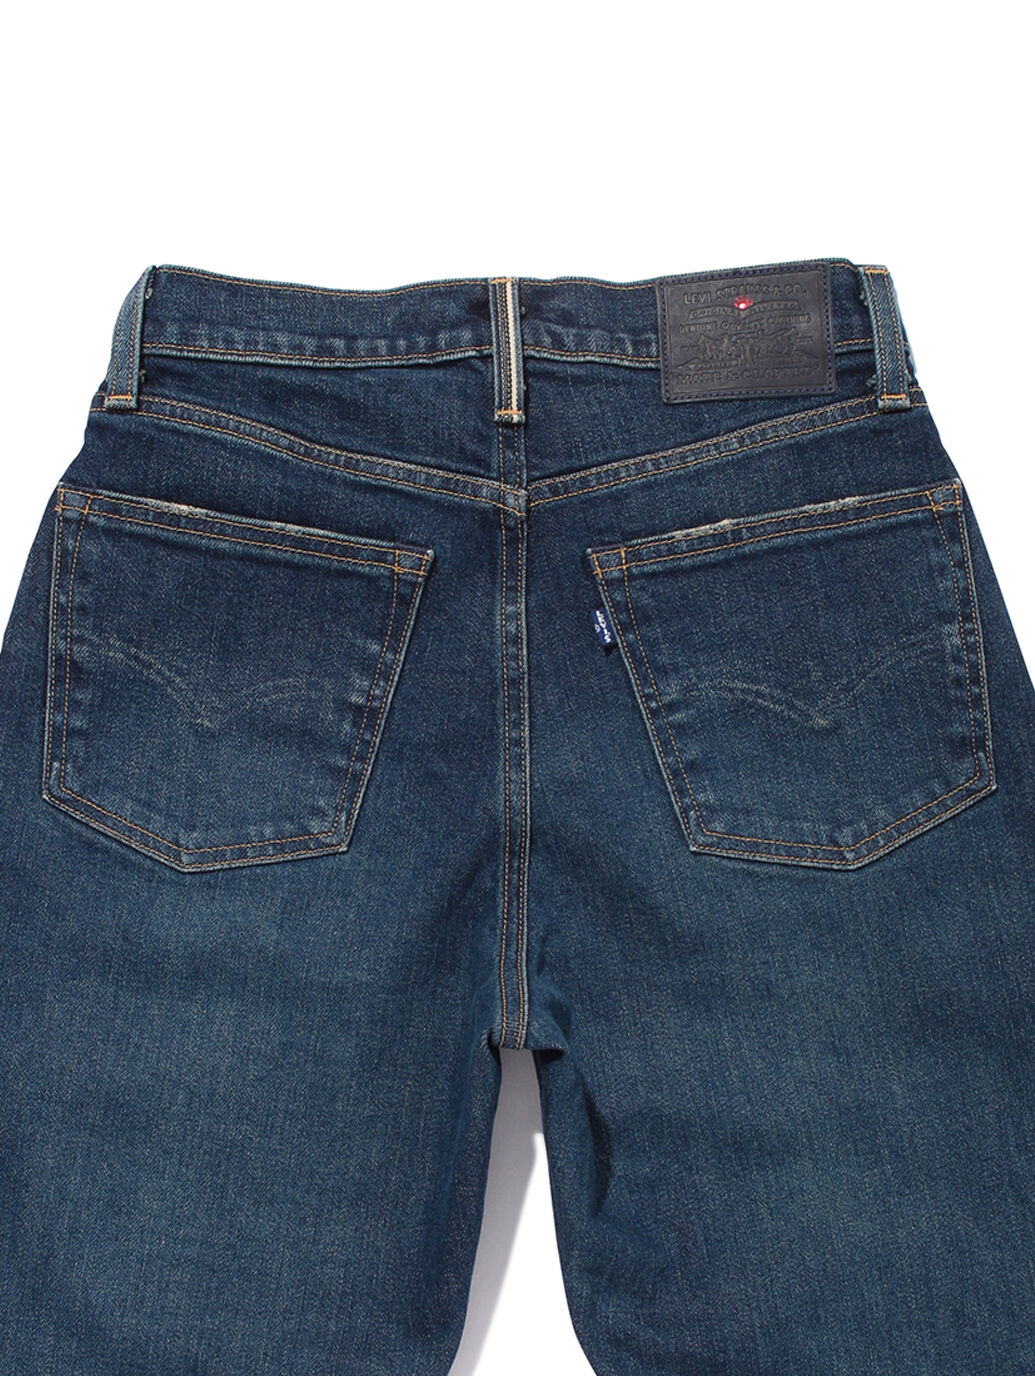 LEVI'S® MADE&CRAFTED®HIGH RISE BORROWED FROM THE BOYS CHIKARE MADE 